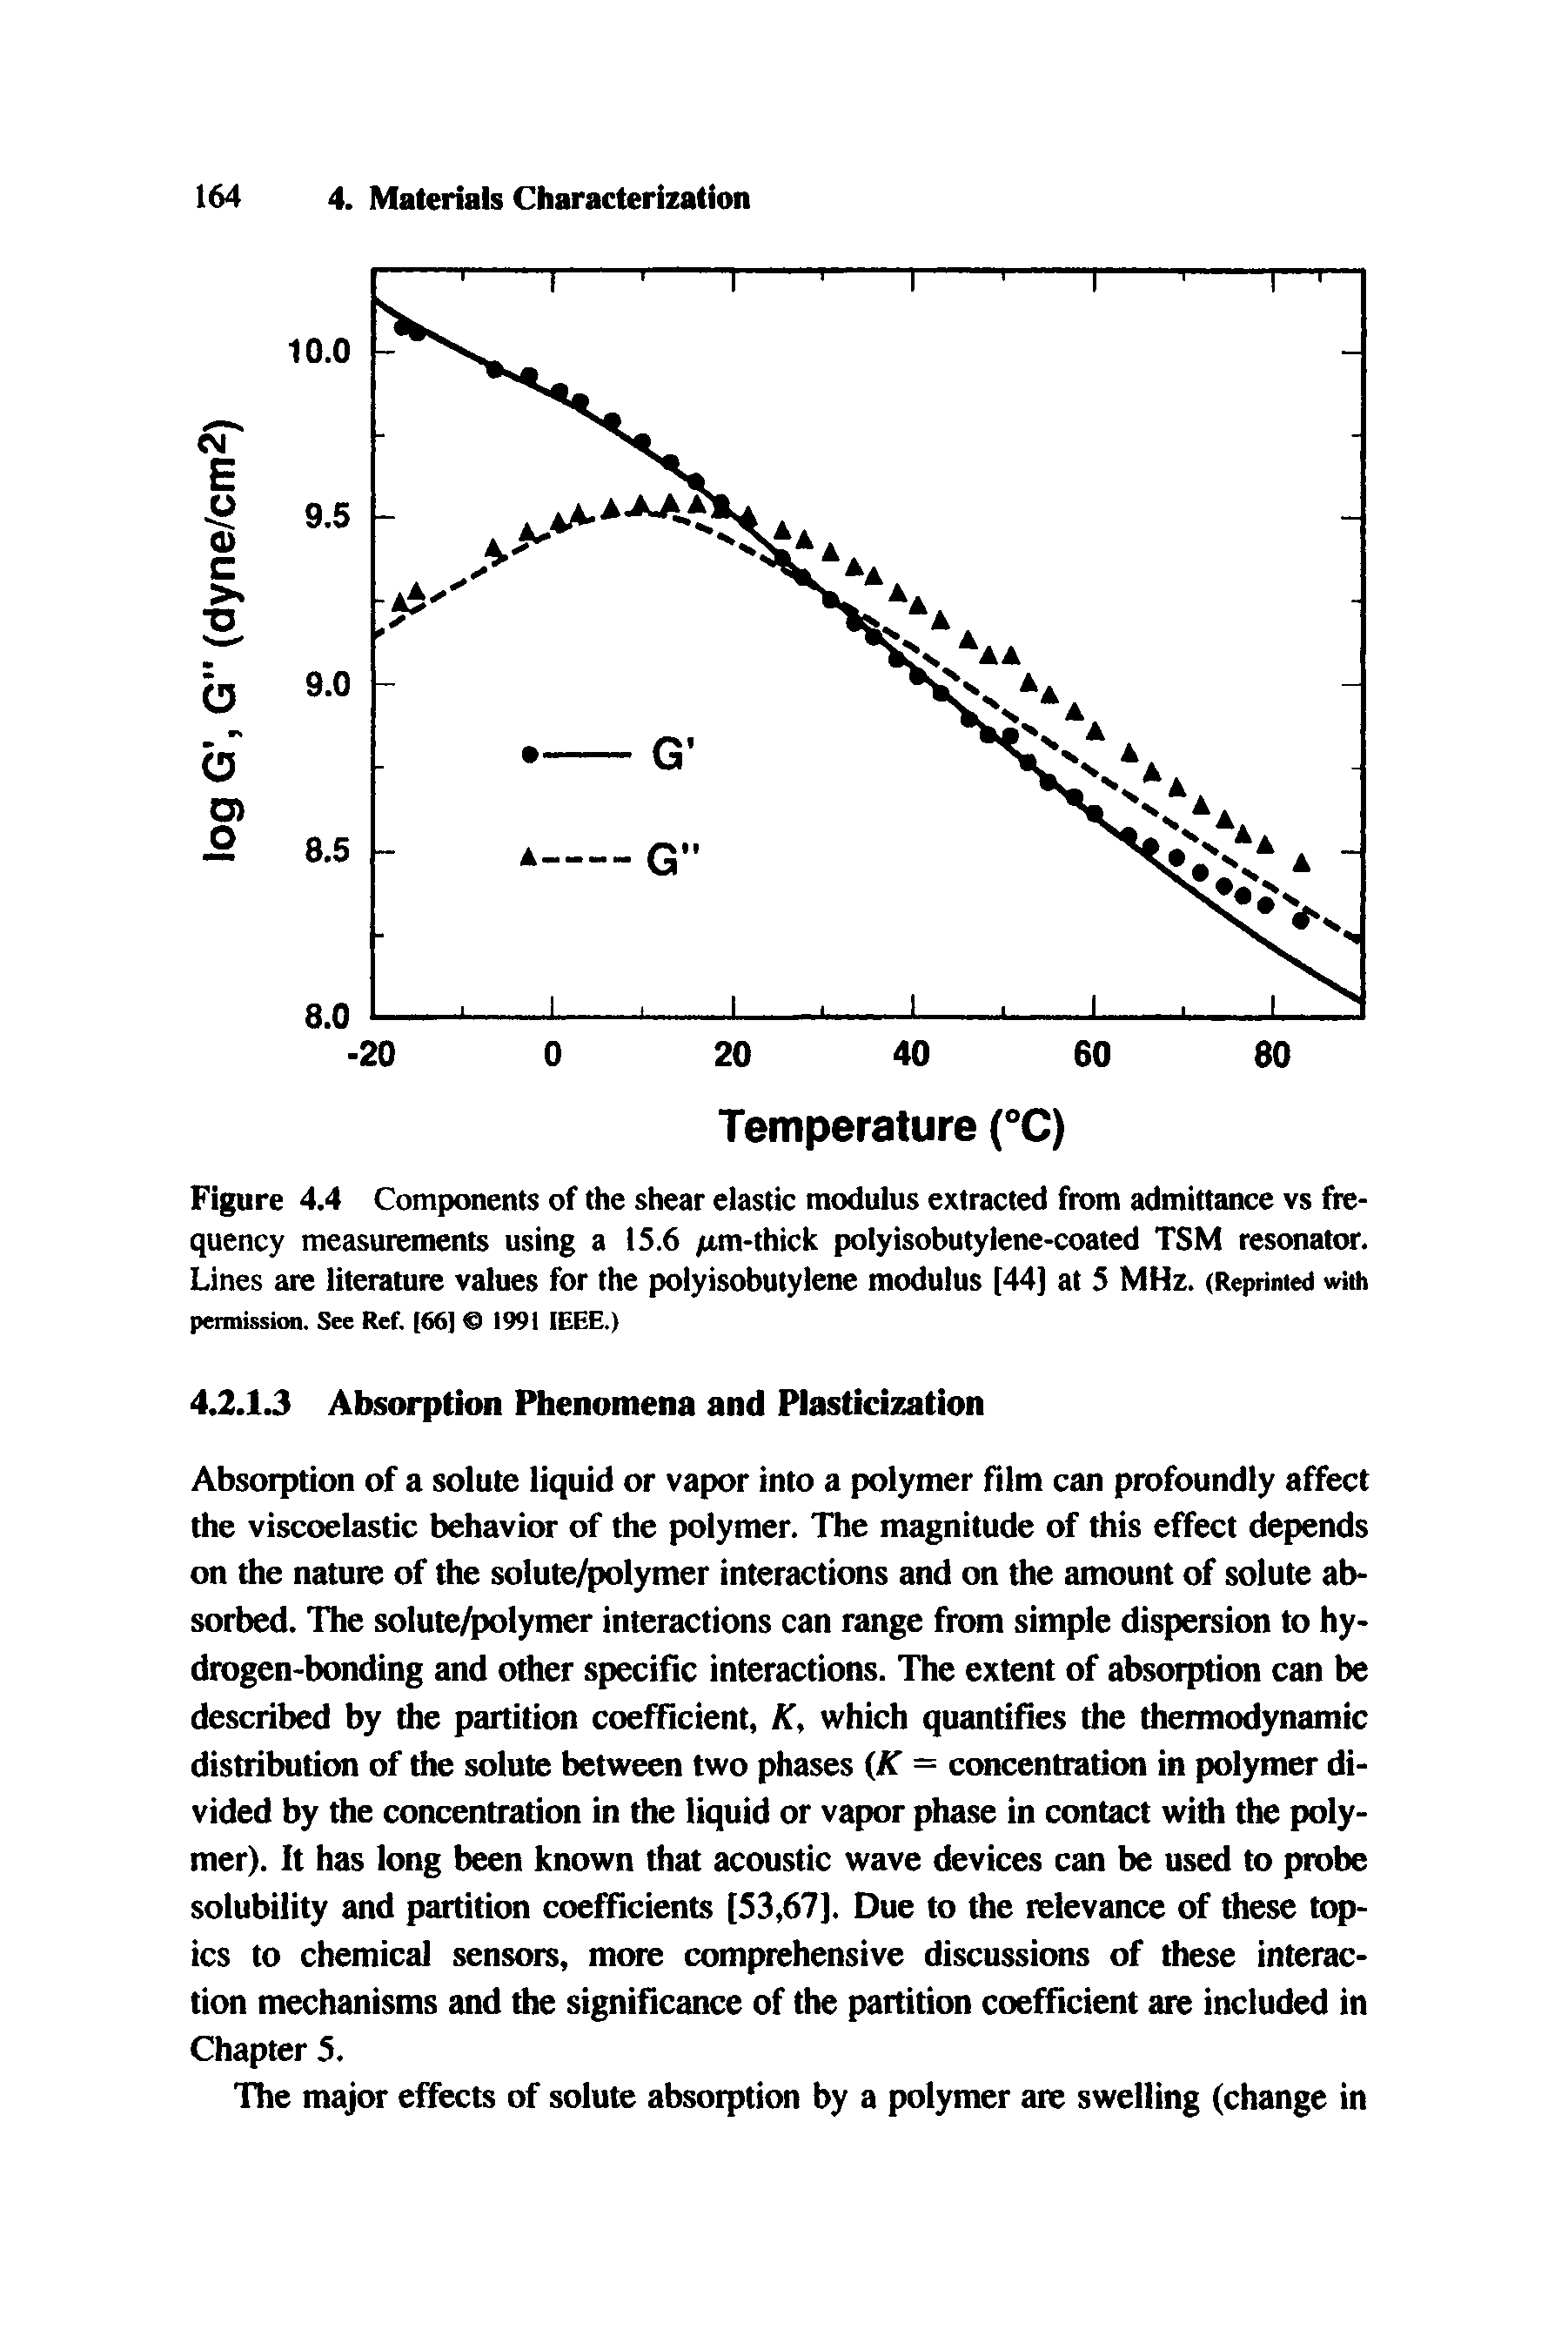 Figure 4.4 Components of the shear elastic modulus extracted from admittance vs frequency measurements using a 1S.6 /Mn-thick polyisobutyiene-coated TSM resonator. Lines are literature values for the polyisobuiylene modulus (44) at 5 MHz. (Reprinted with permisskm. See Ref. [66] 1991 IEEE.)...